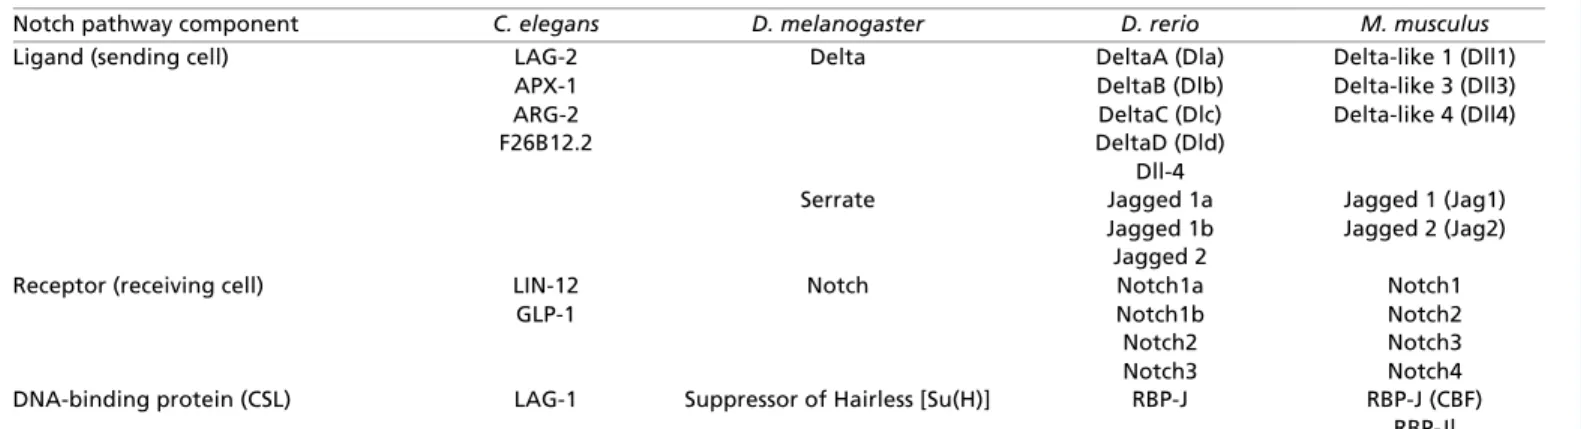 Table 1. Across species: the basic components of the Notch signaling pathway